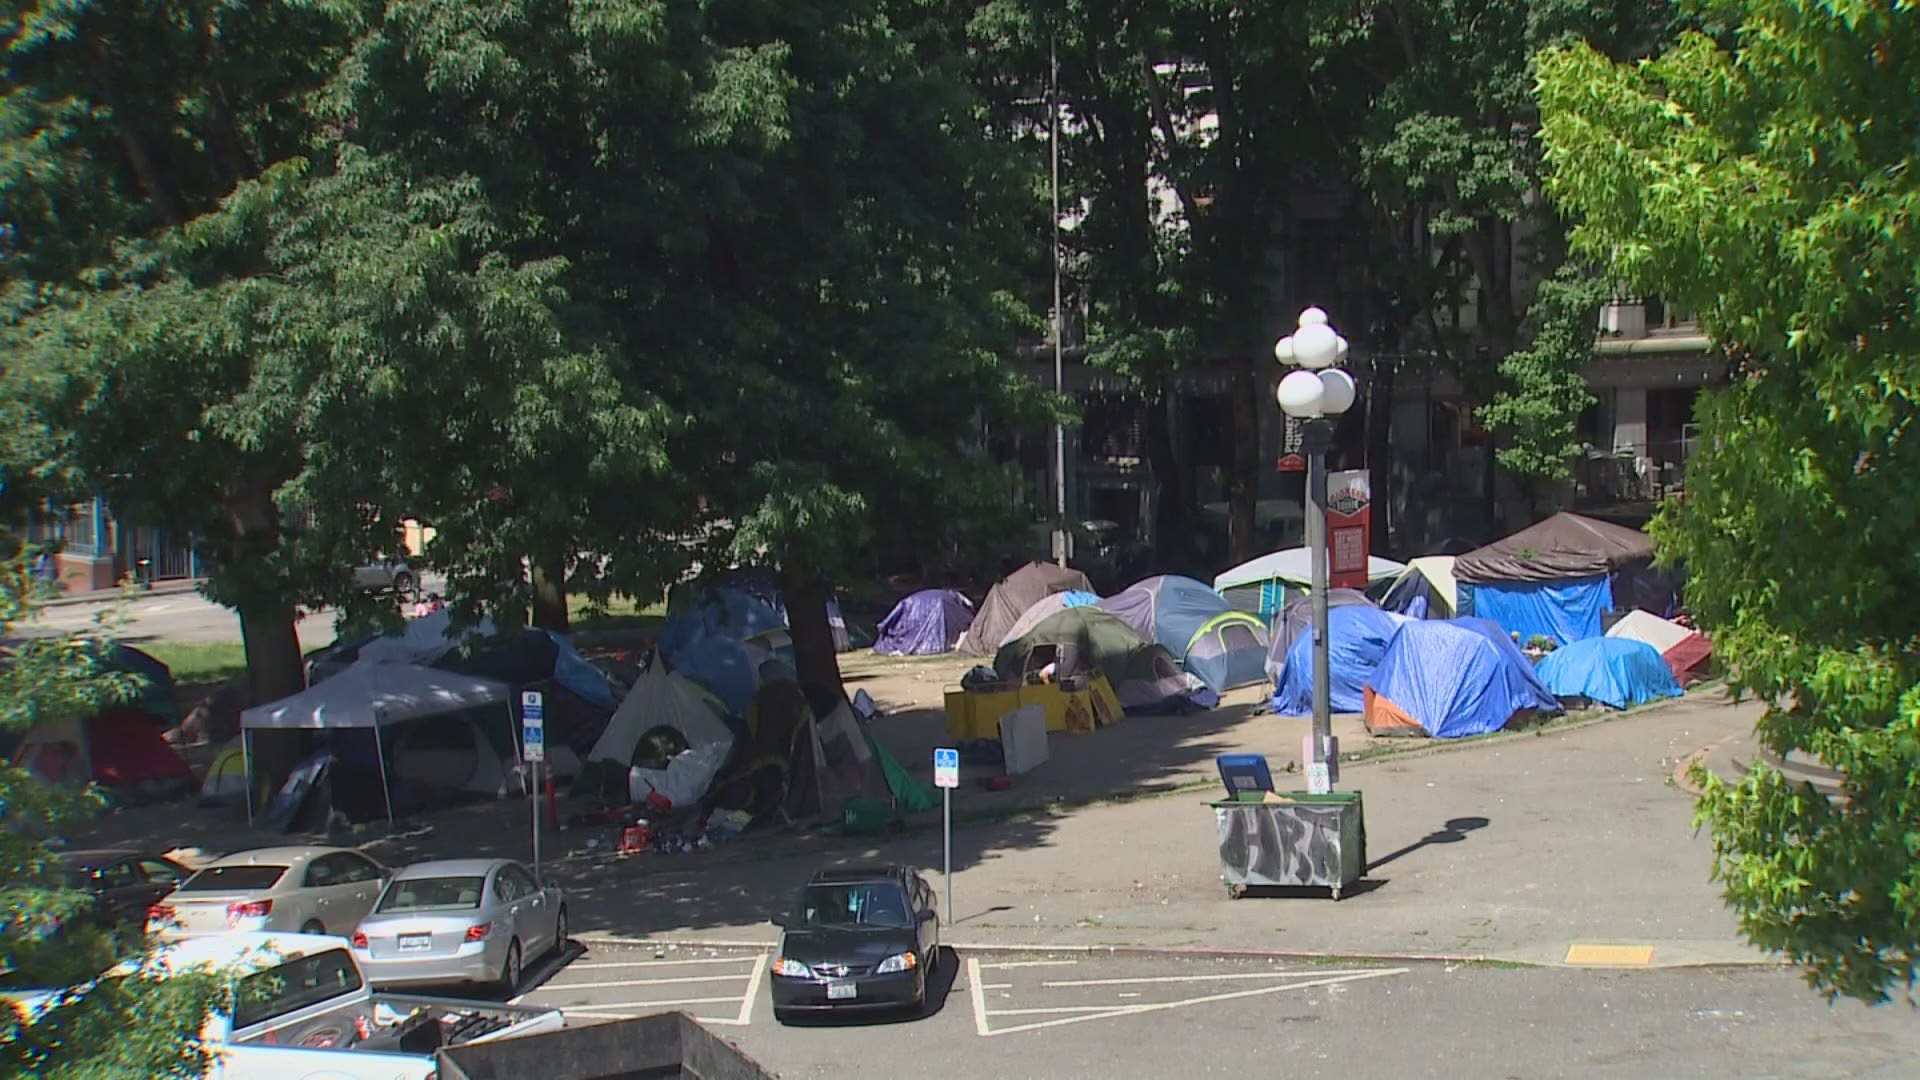 The park has been overrun by tents during the course of the pandemic, and has been a trouble spot for years.